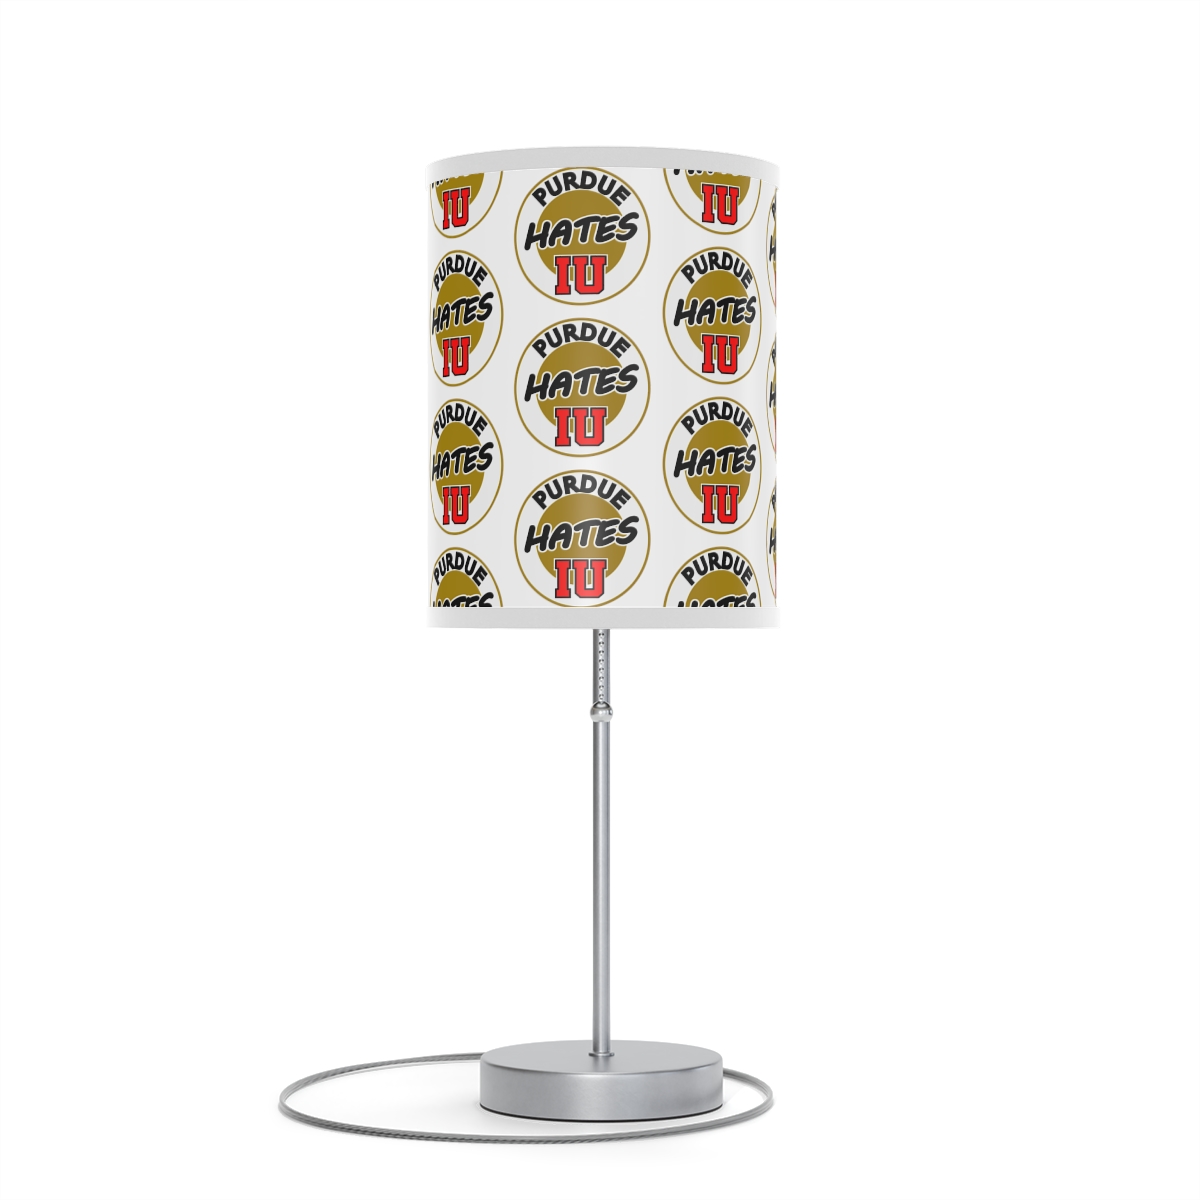 Purdue Hates IU Lamp on a Stand product thumbnail image